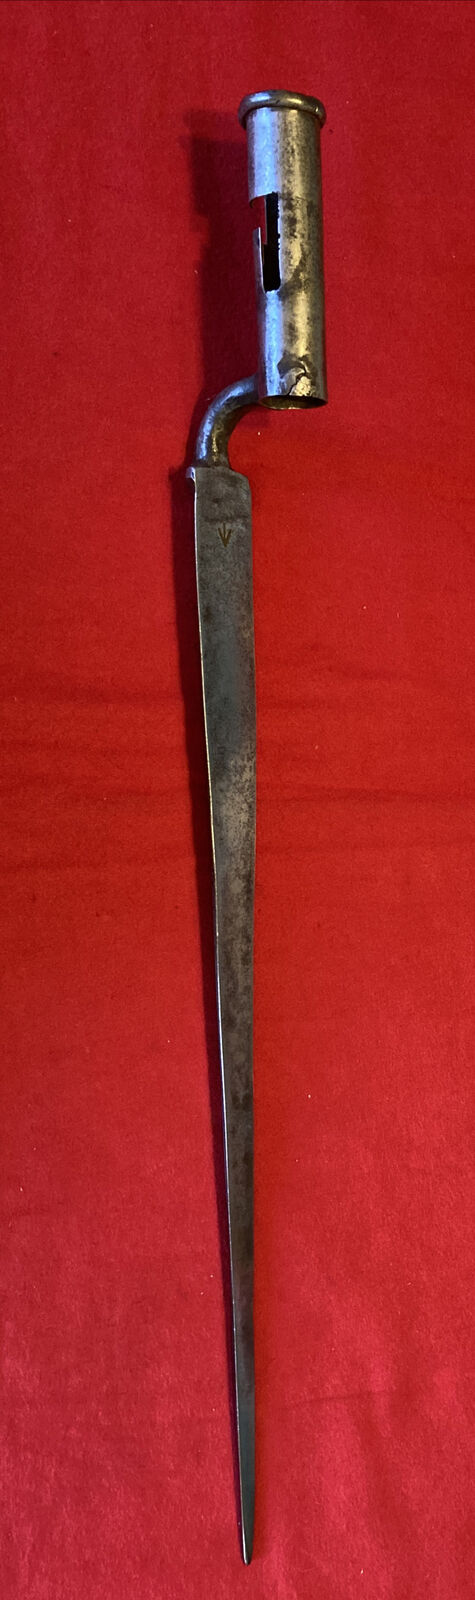 18th/19th C. British Brown Bess Musket Bayonet, Large Broad Arrow Mark, Cleaned